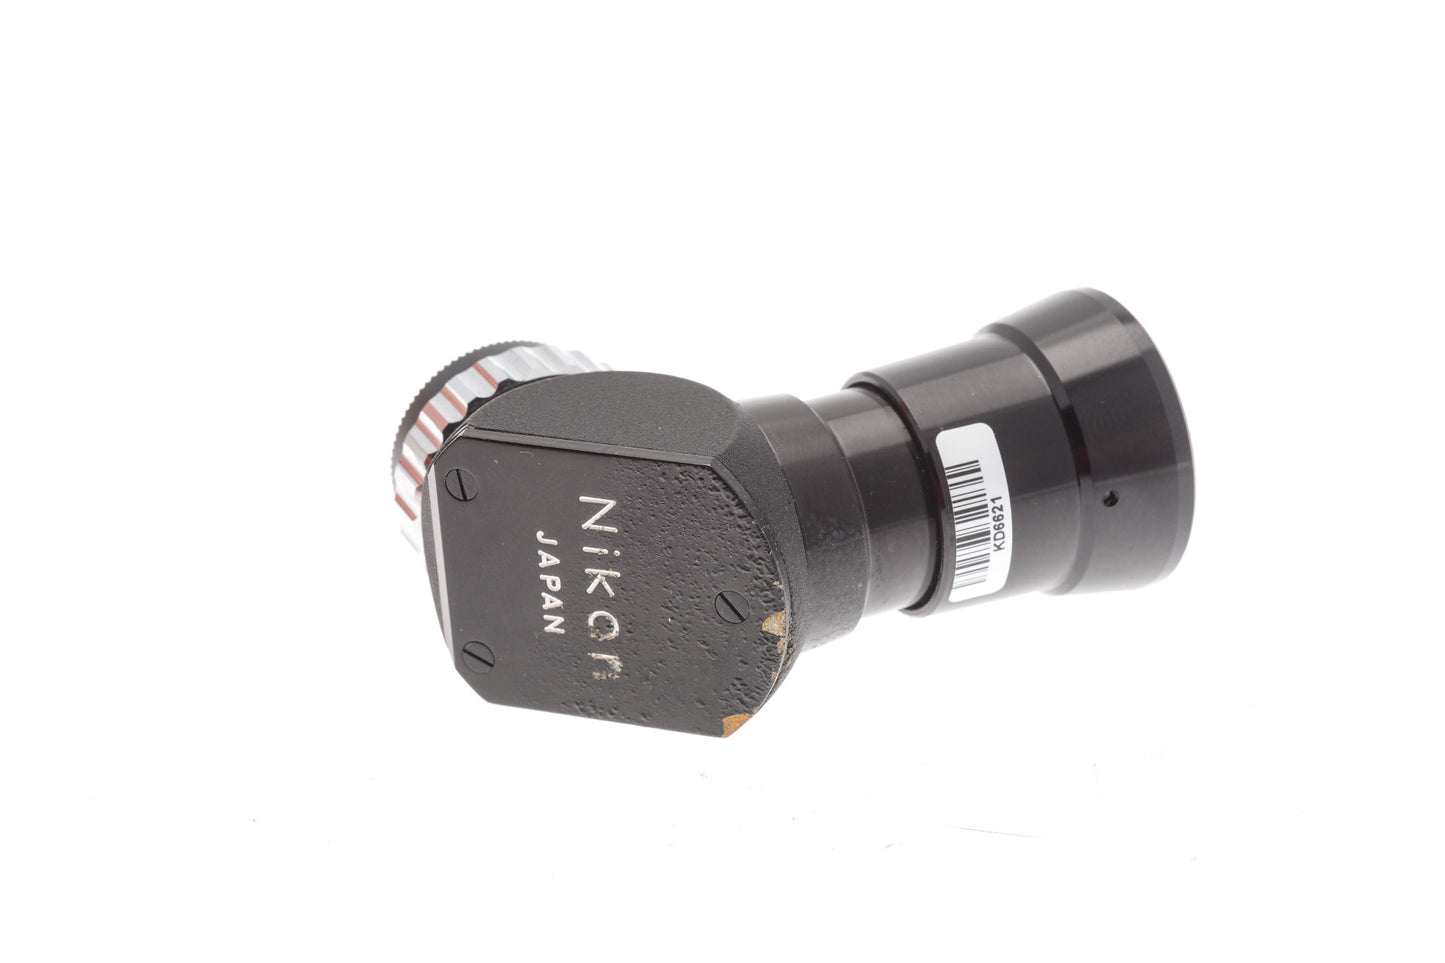 Nikon Right Angle Viewfinder - Accessory